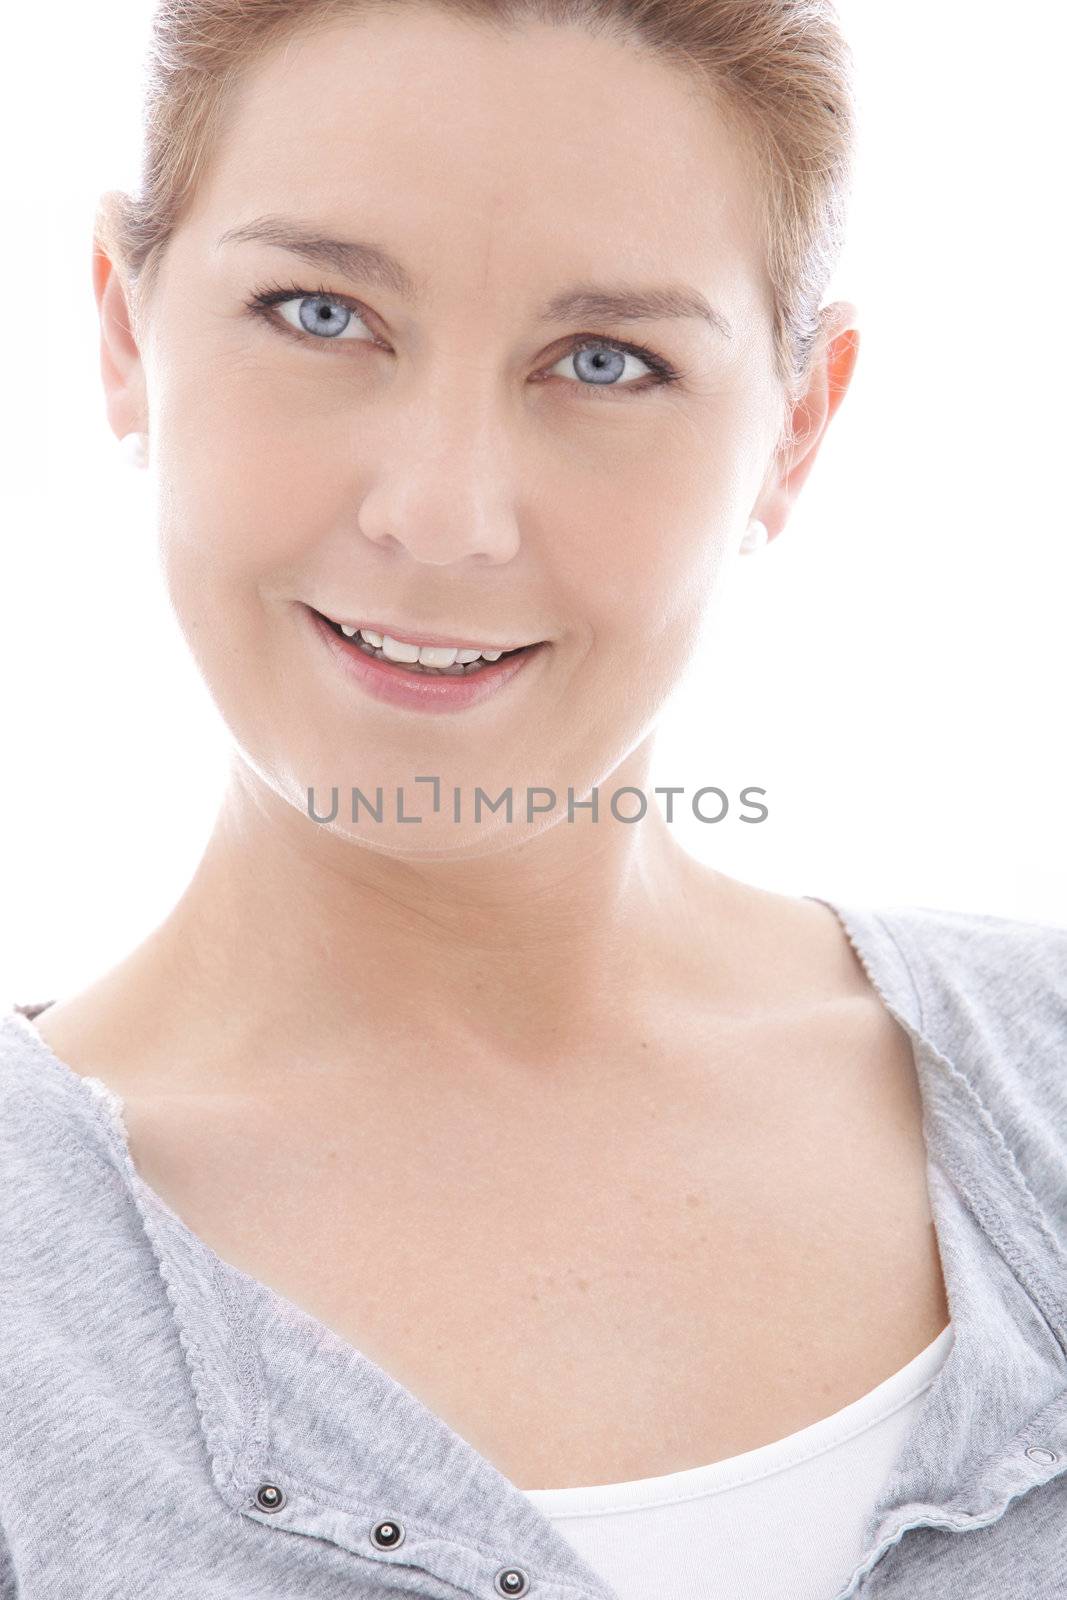 Attractive blue eyed mature woman looking directly at the camera with a smile, isolated on white